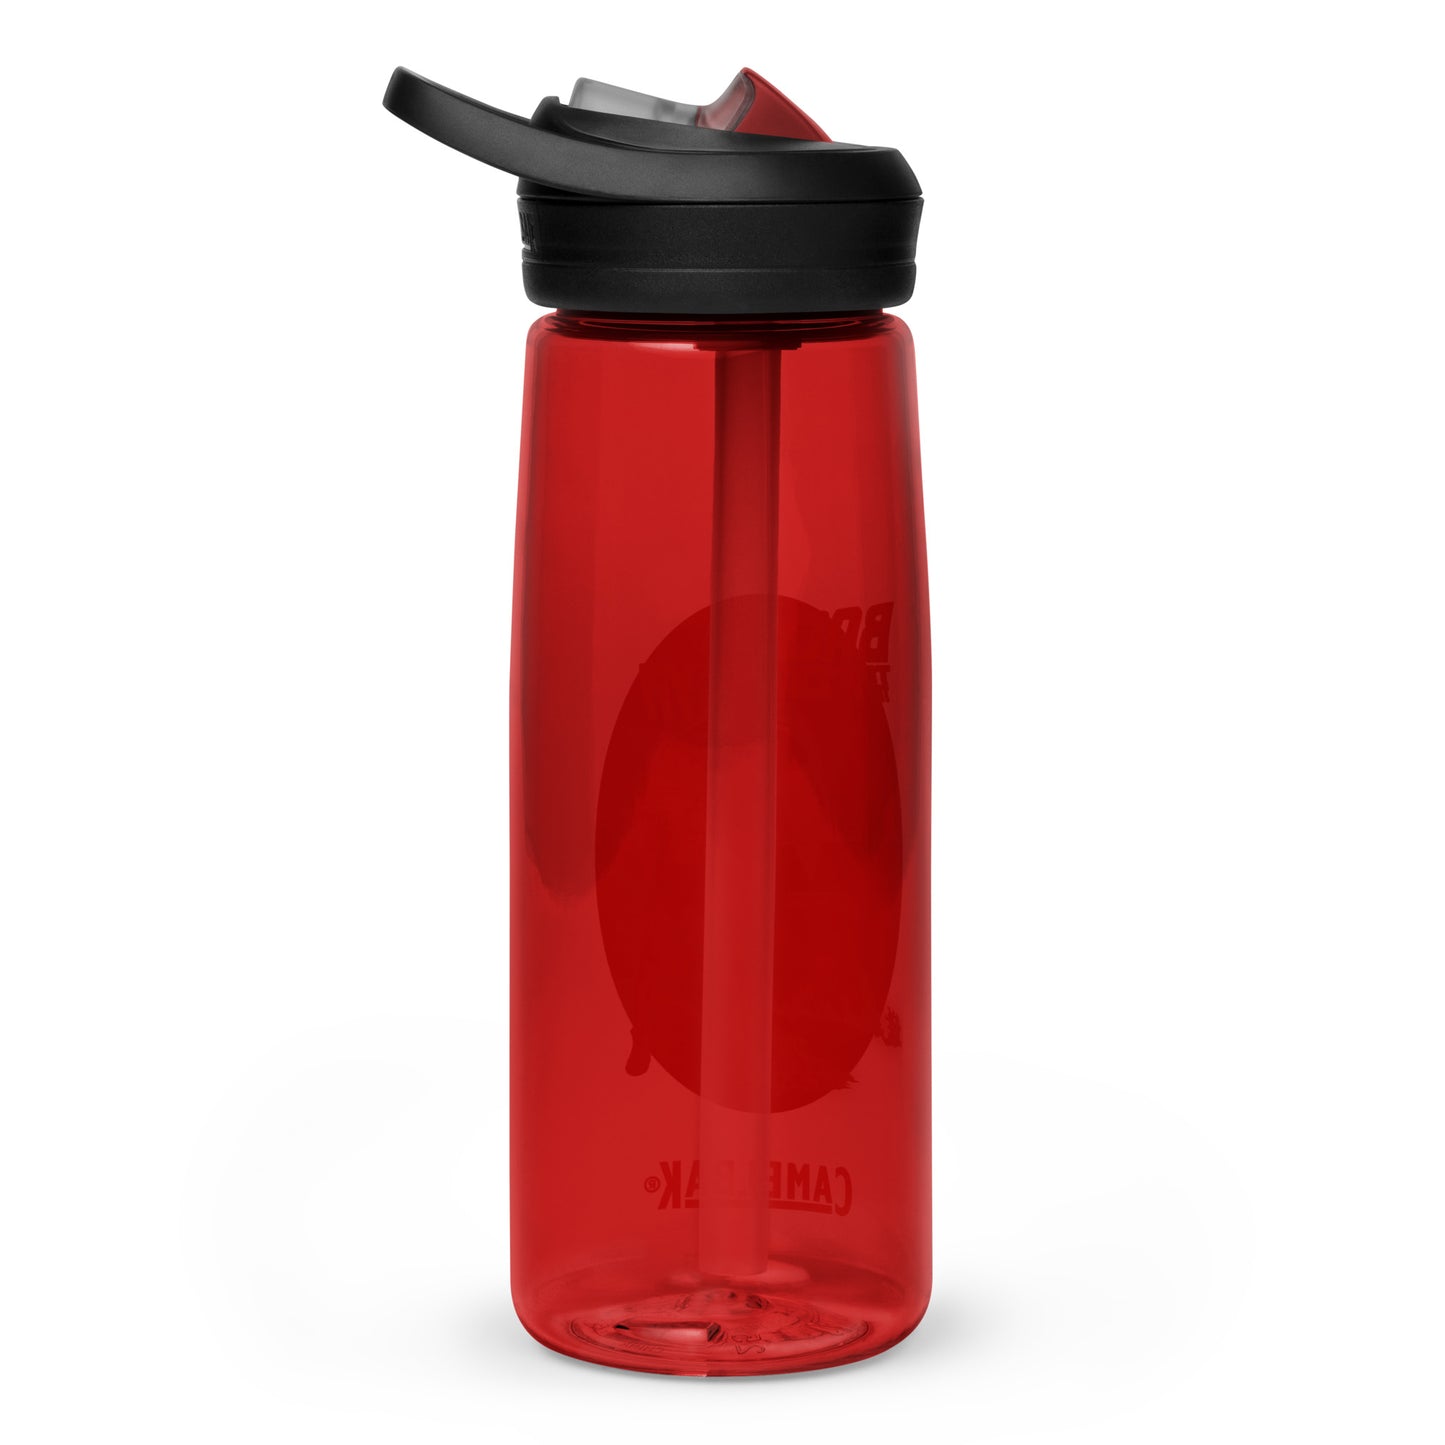 Back To The F*cking (Image) Gym Water Bottle